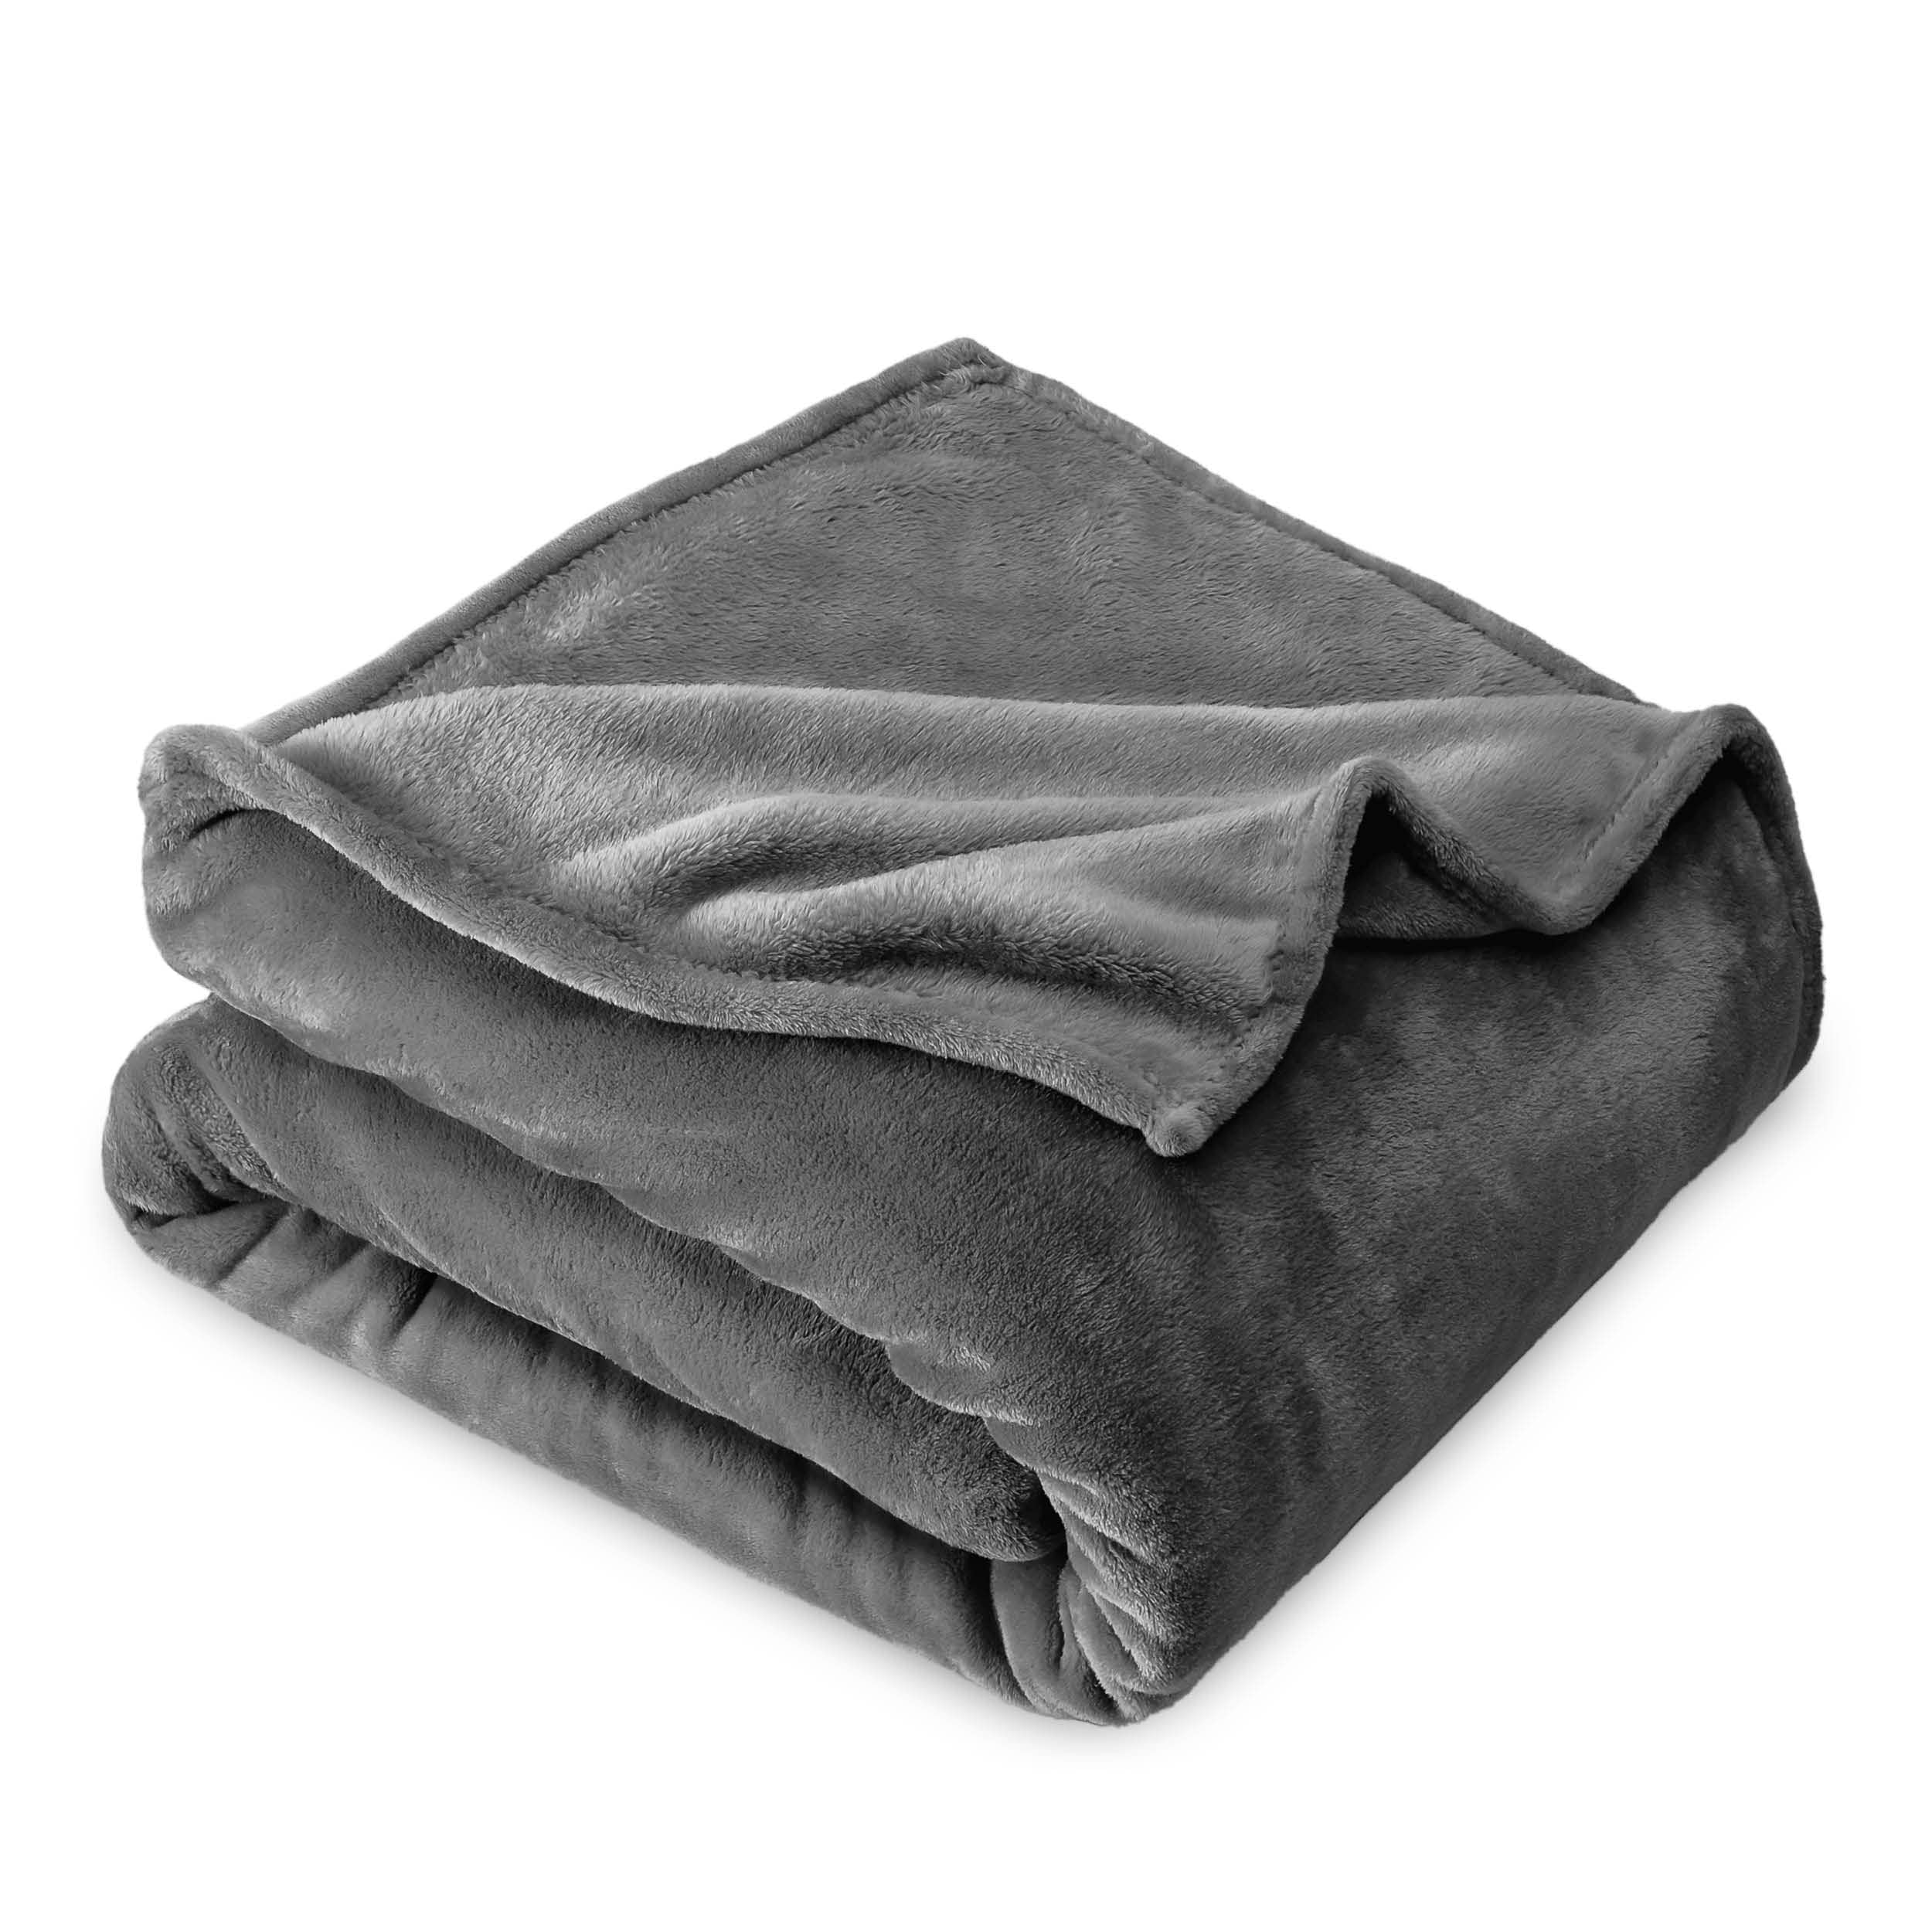 Book Cover Bare Home Fleece Blanket - Twin/Twin Extra Long Blanket - Grey - Lightweight Blanket for Bed, Sofa, Couch, Camping, and Travel - Microplush - Ultra Soft Warm Blanket (Twin/Twin XL, Grey) Twin/Twin XL 01 - Grey